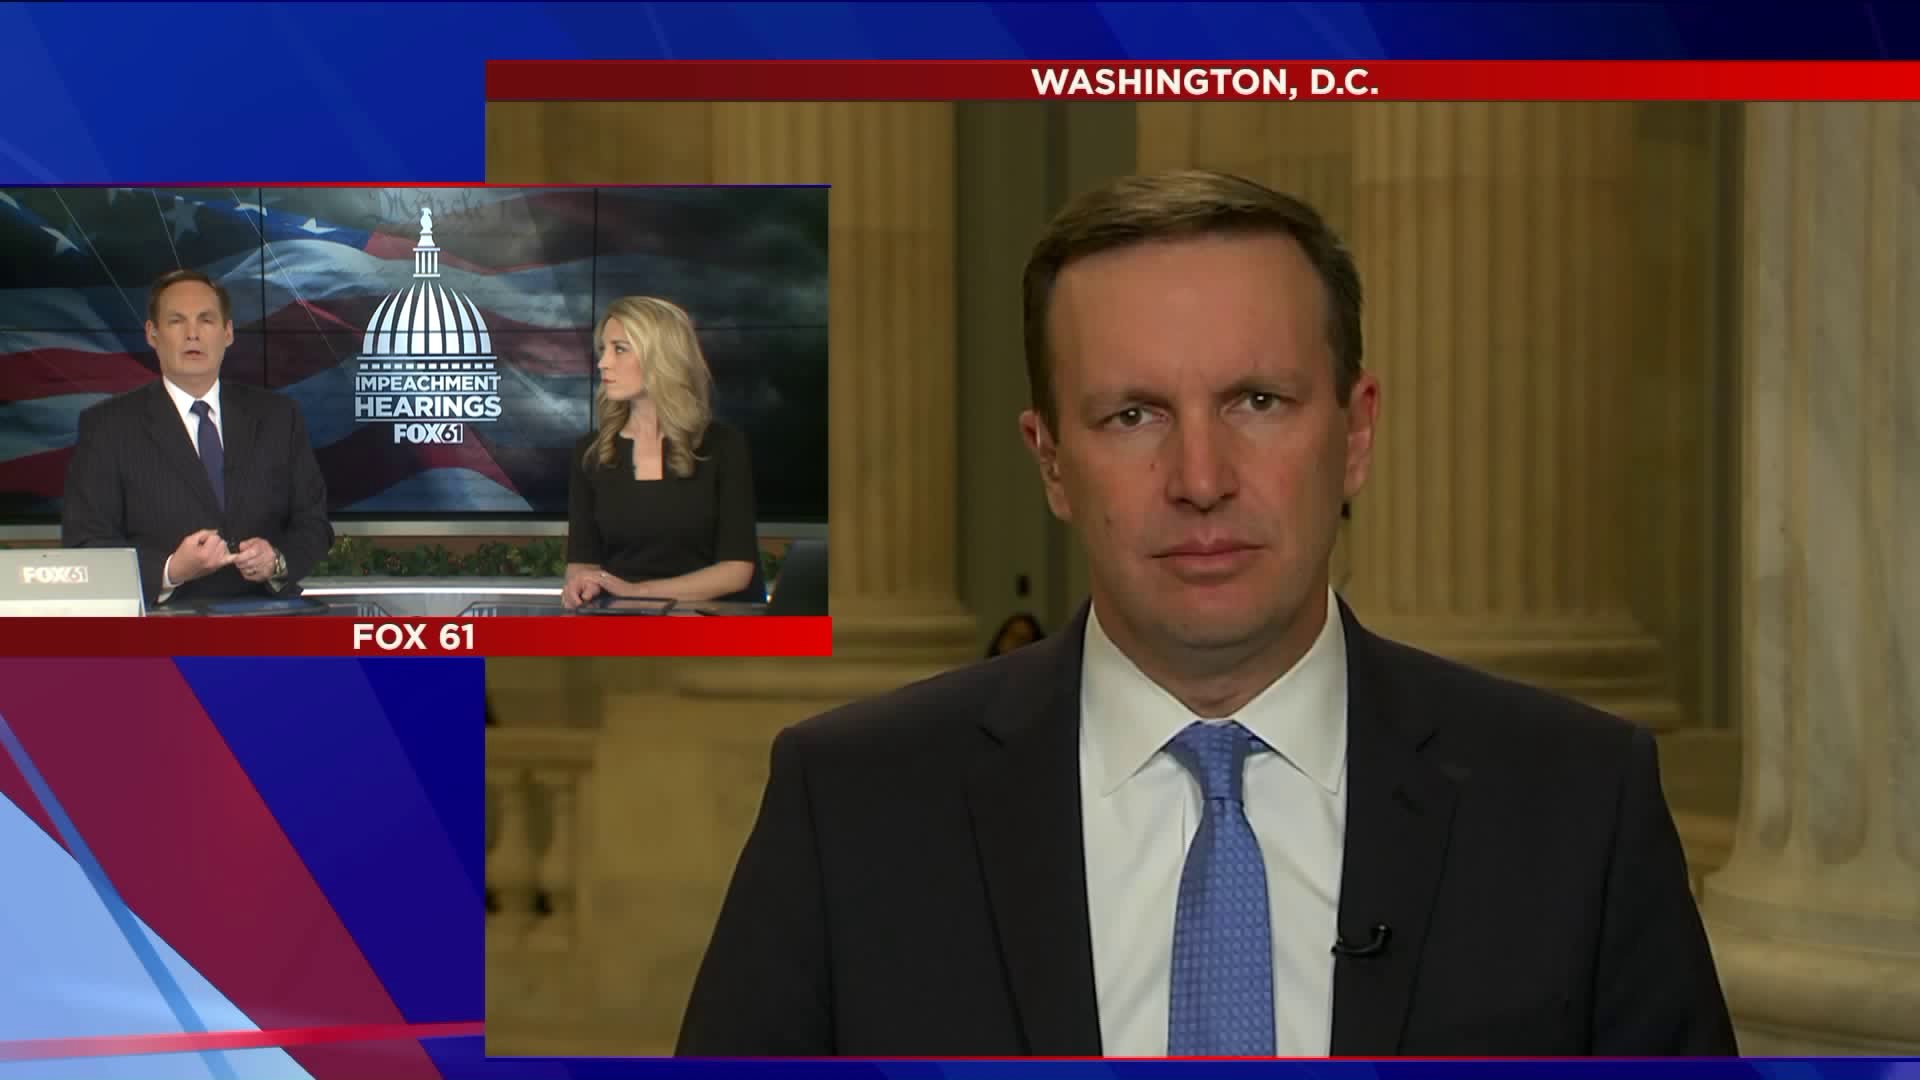 Seantor Chris Murphy discusses the recent impeachment hearings